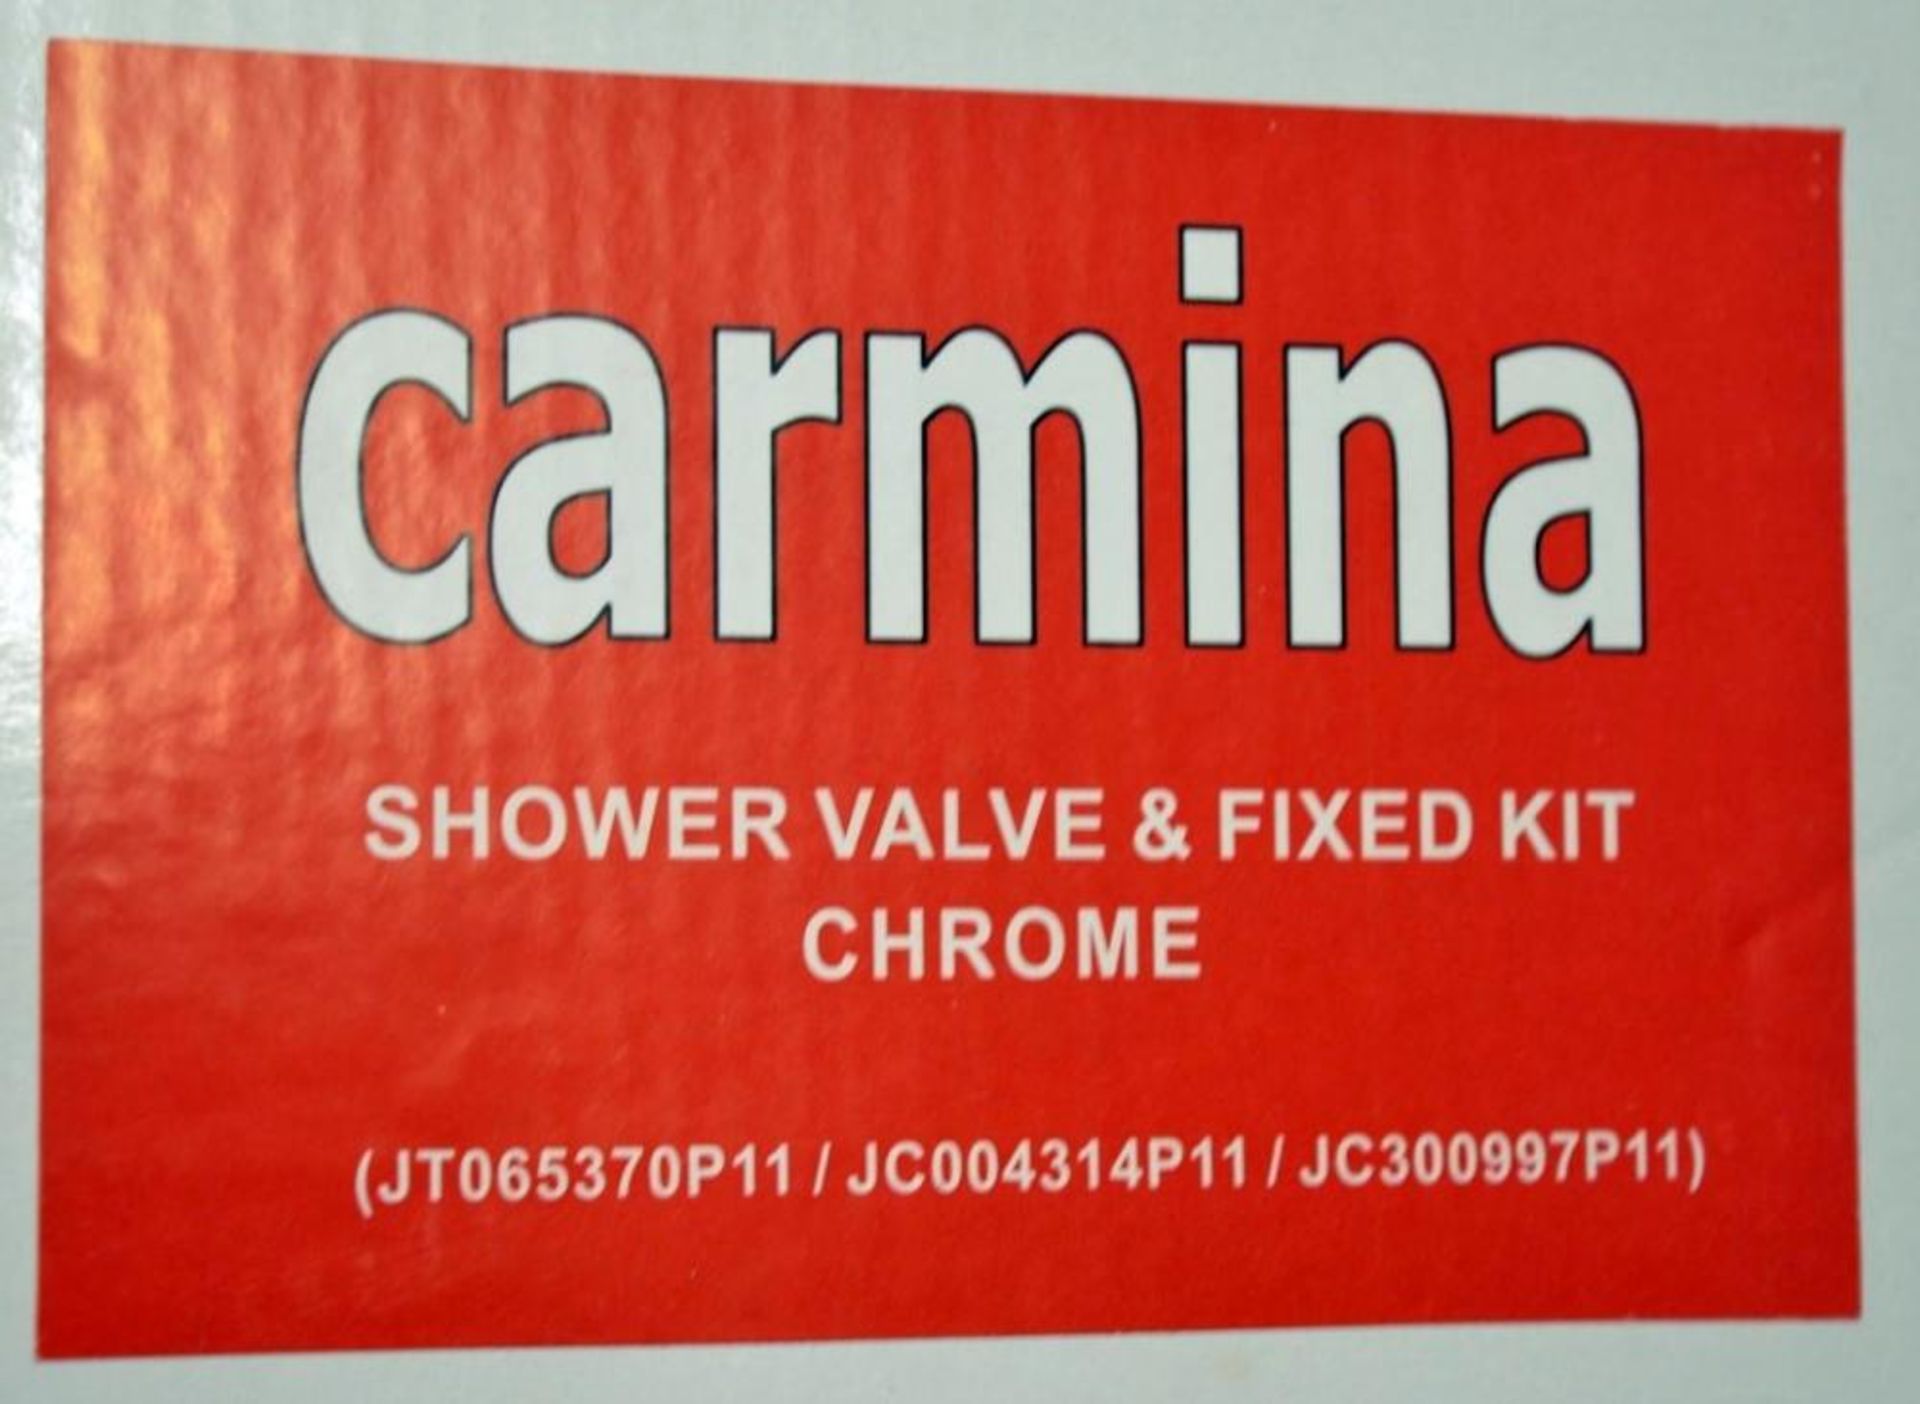 1 x Carmina Shower Valve Kit - Contains Chrome Shower Head, Fixed Arm and Manual Control - Brass Con - Image 10 of 13